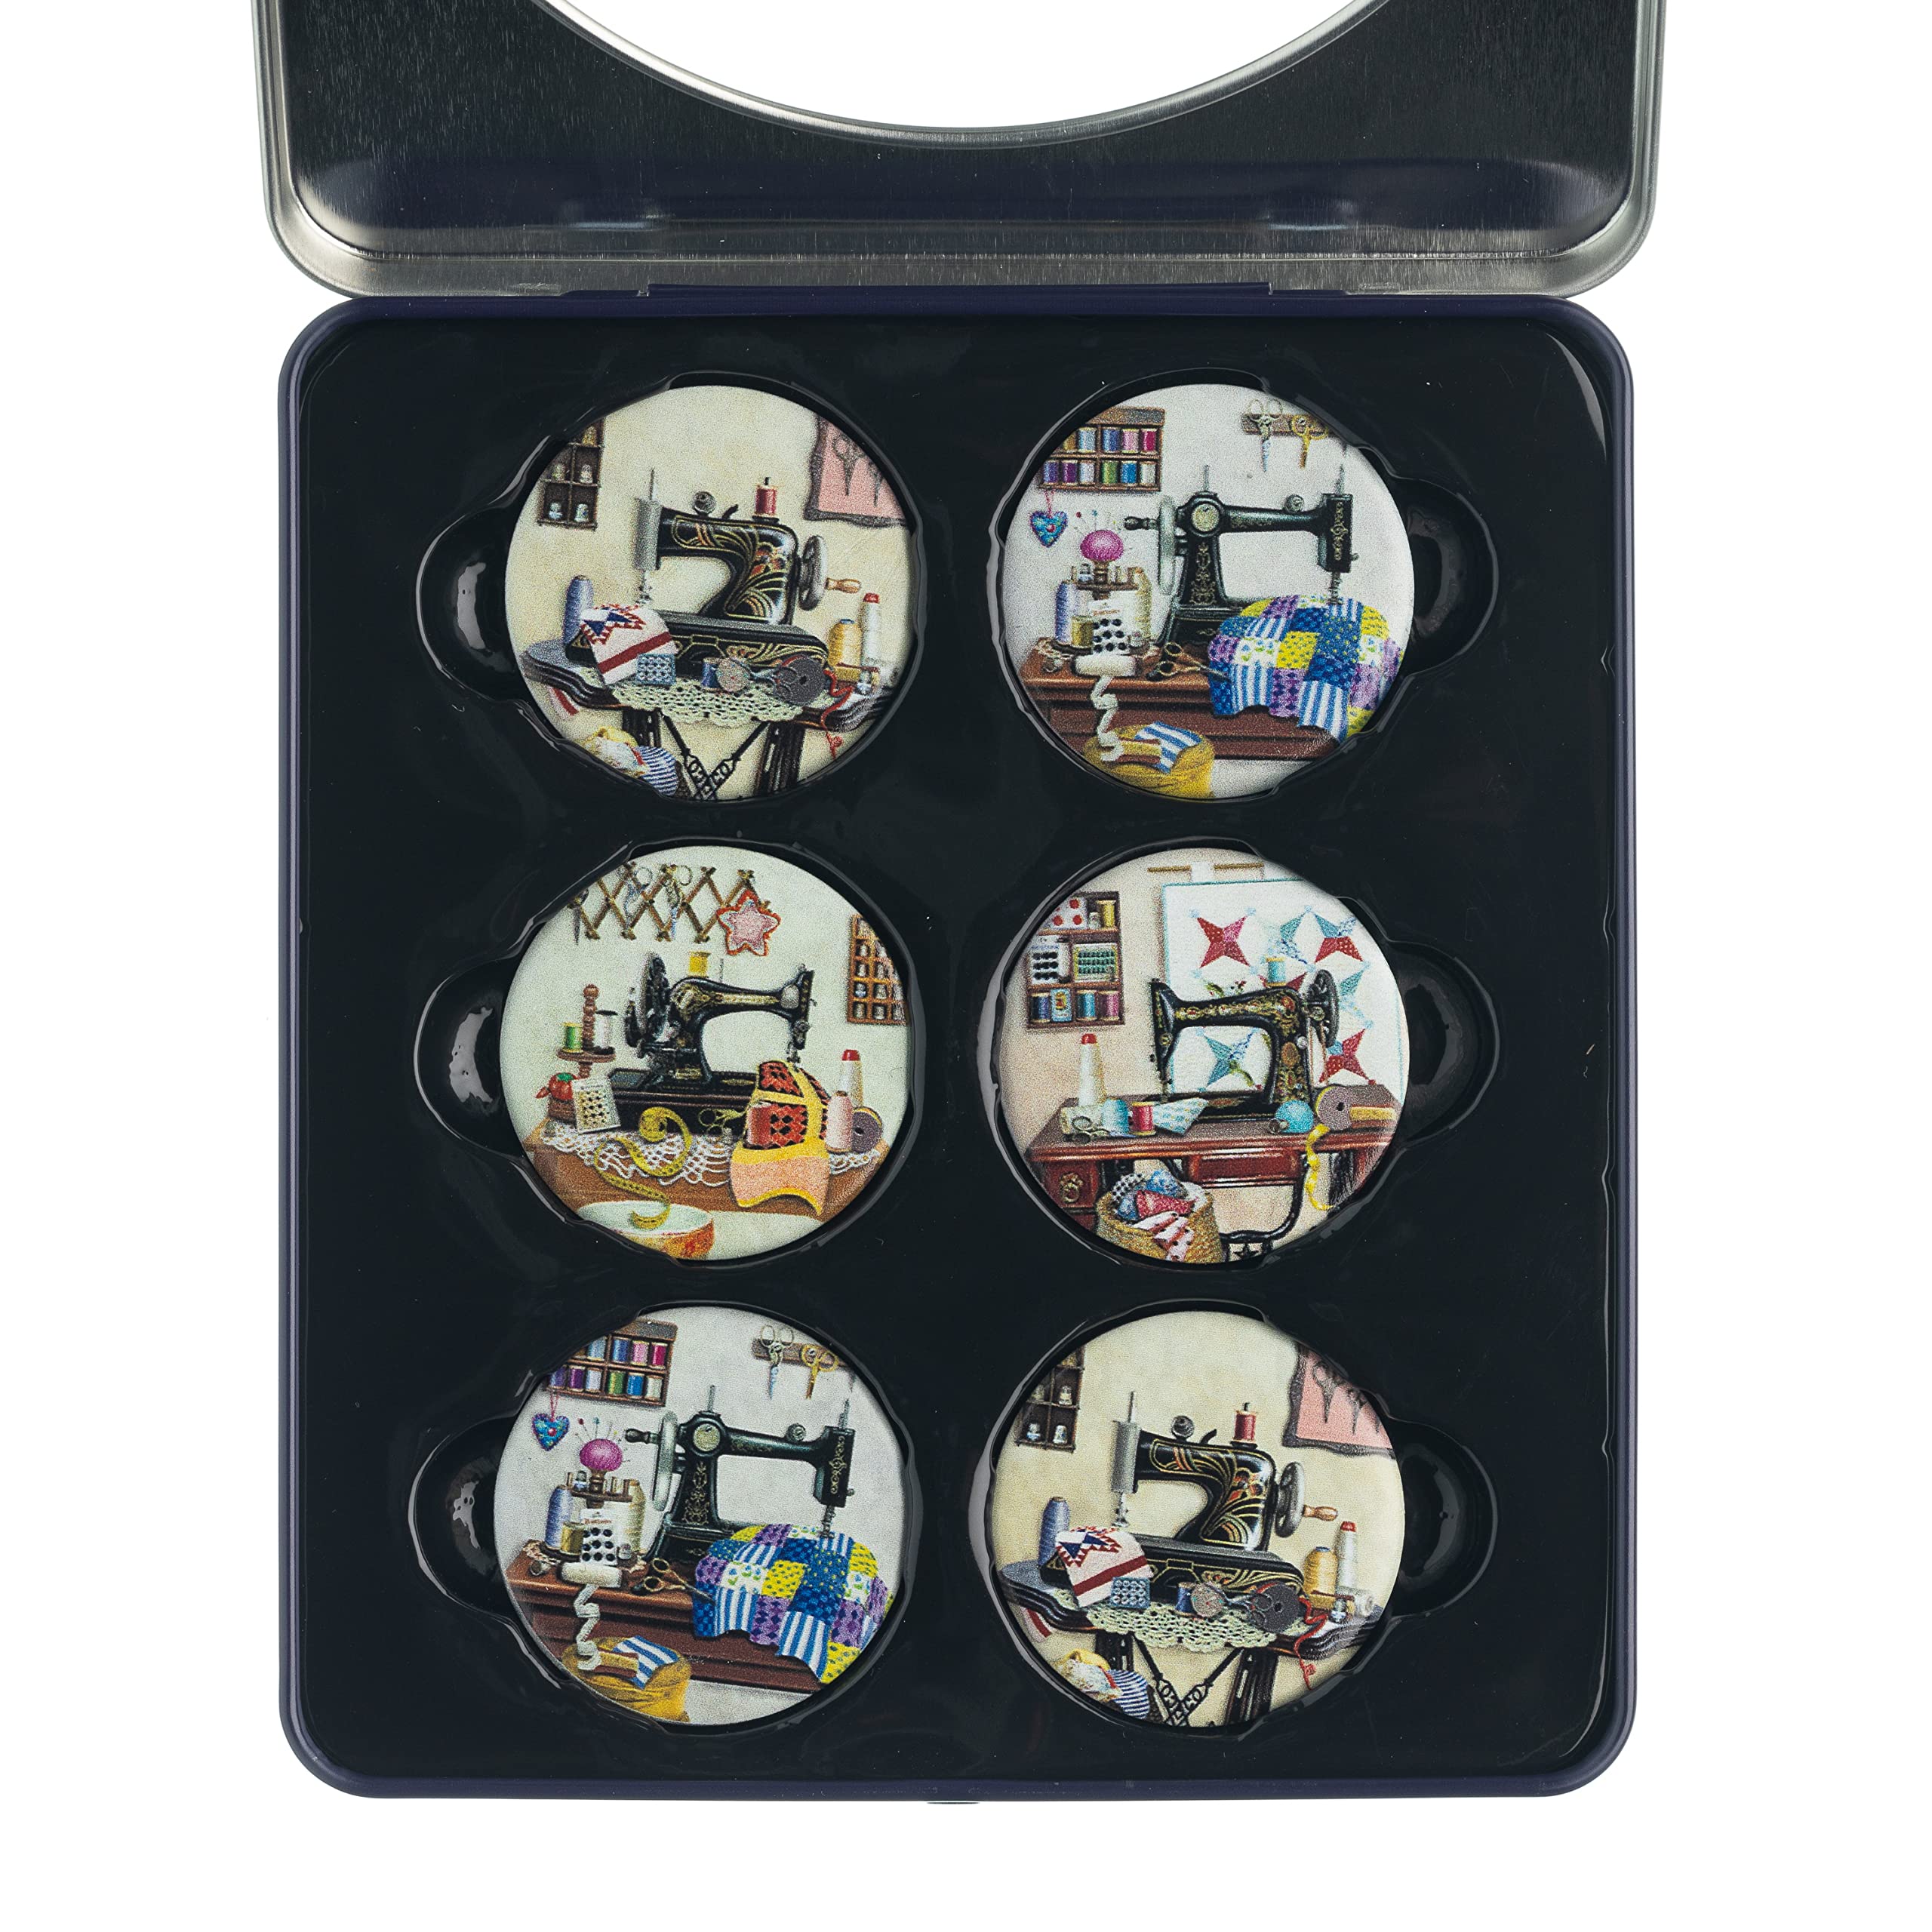 The Quilted Bear Pattern Weights - Multiple Designs of Scratch Resistant  Paper Weights/Pattern Weights for Sewing or Cutting Fabric Rosalind Soloman  - Sewing Machines 6 x 40mm